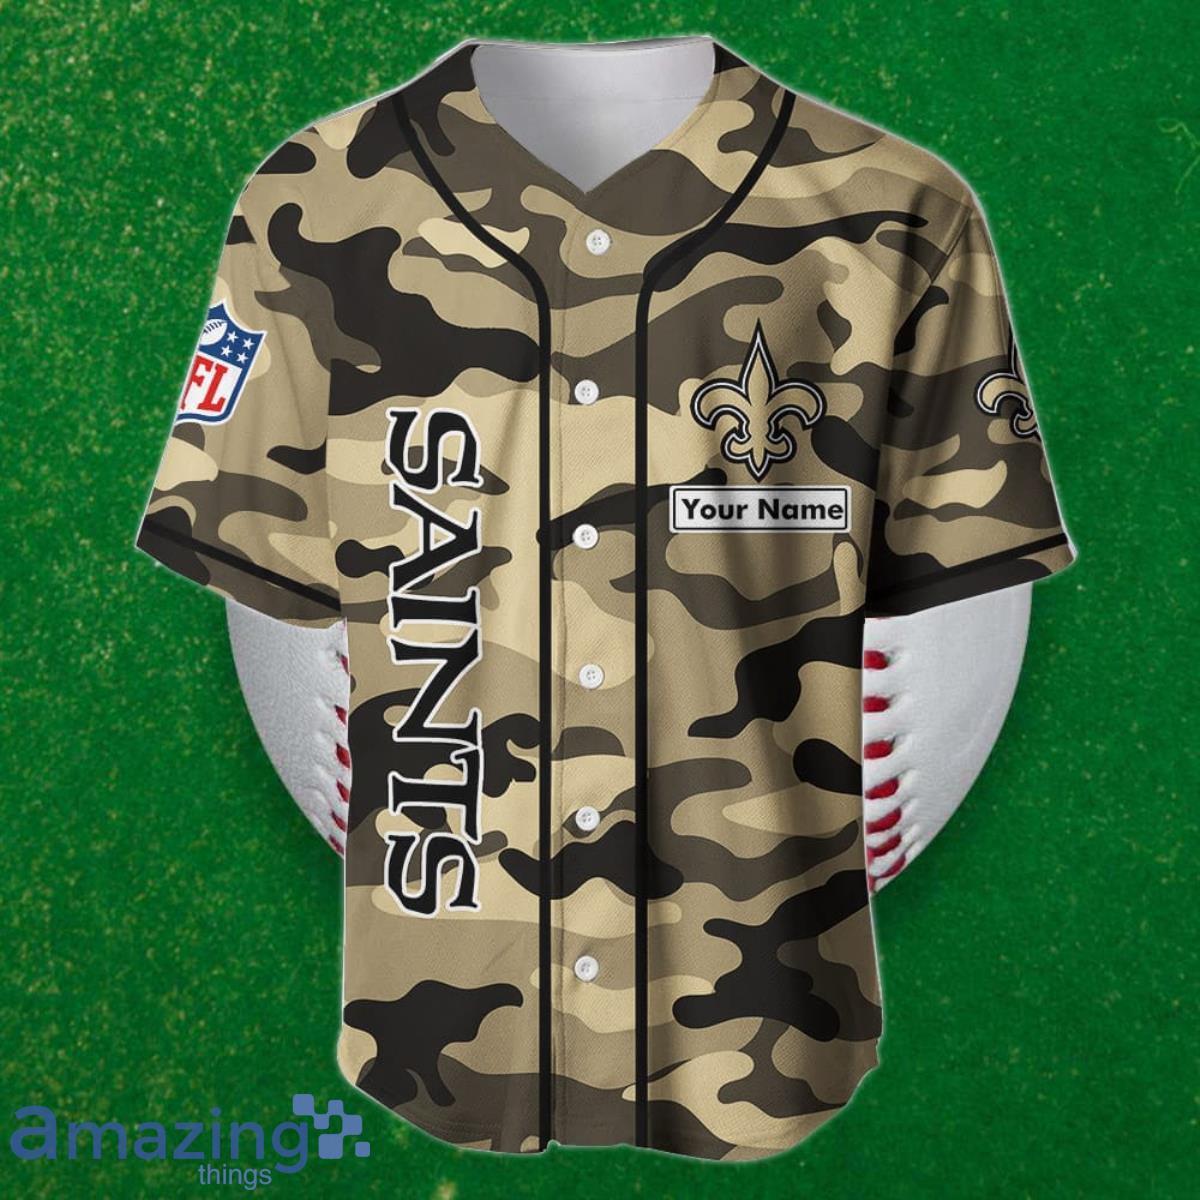 Personalized Raiders Baseball Jersey Button Up Unique Raiders Gifts -  Personalized Gifts: Family, Sports, Occasions, Trending